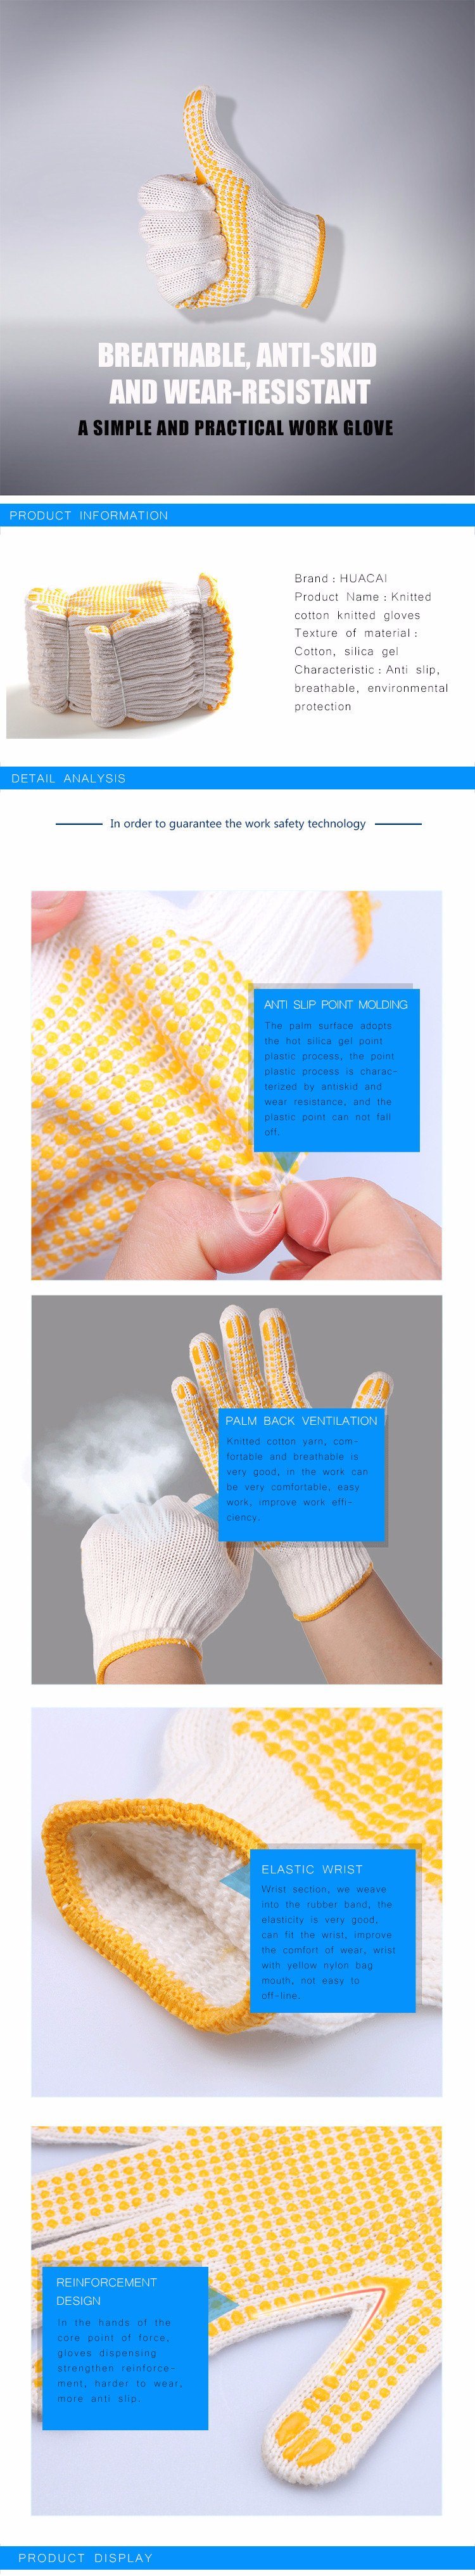 10g Cotton Shell PVC Dots Coated Gloves